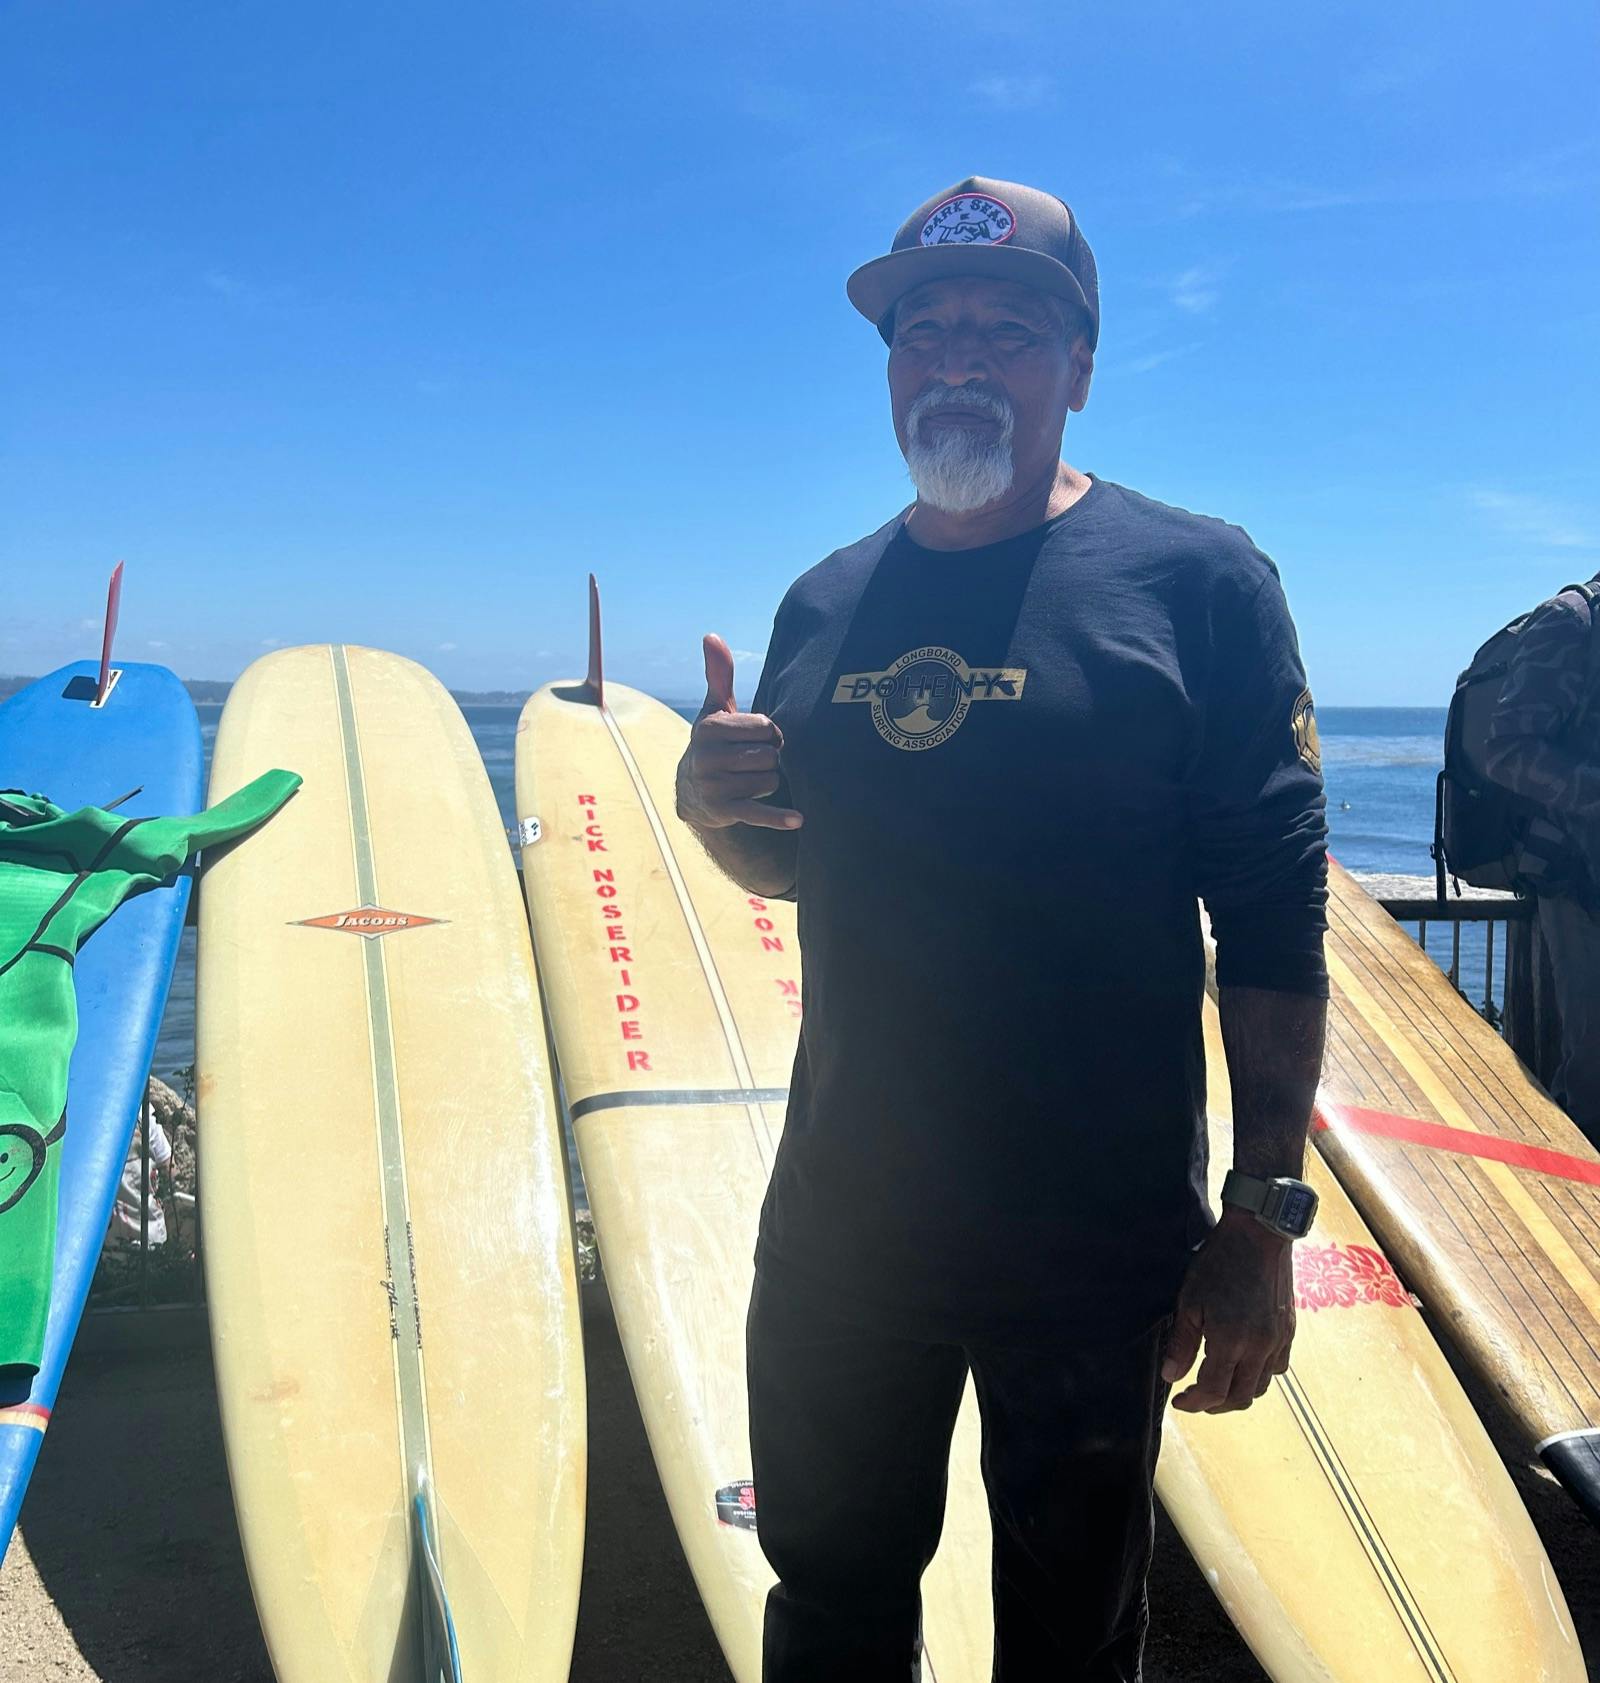 Marciano “Chango” Cruz stands in front of a row of surfboards at Pleasure Point in Santa Cruz, CA